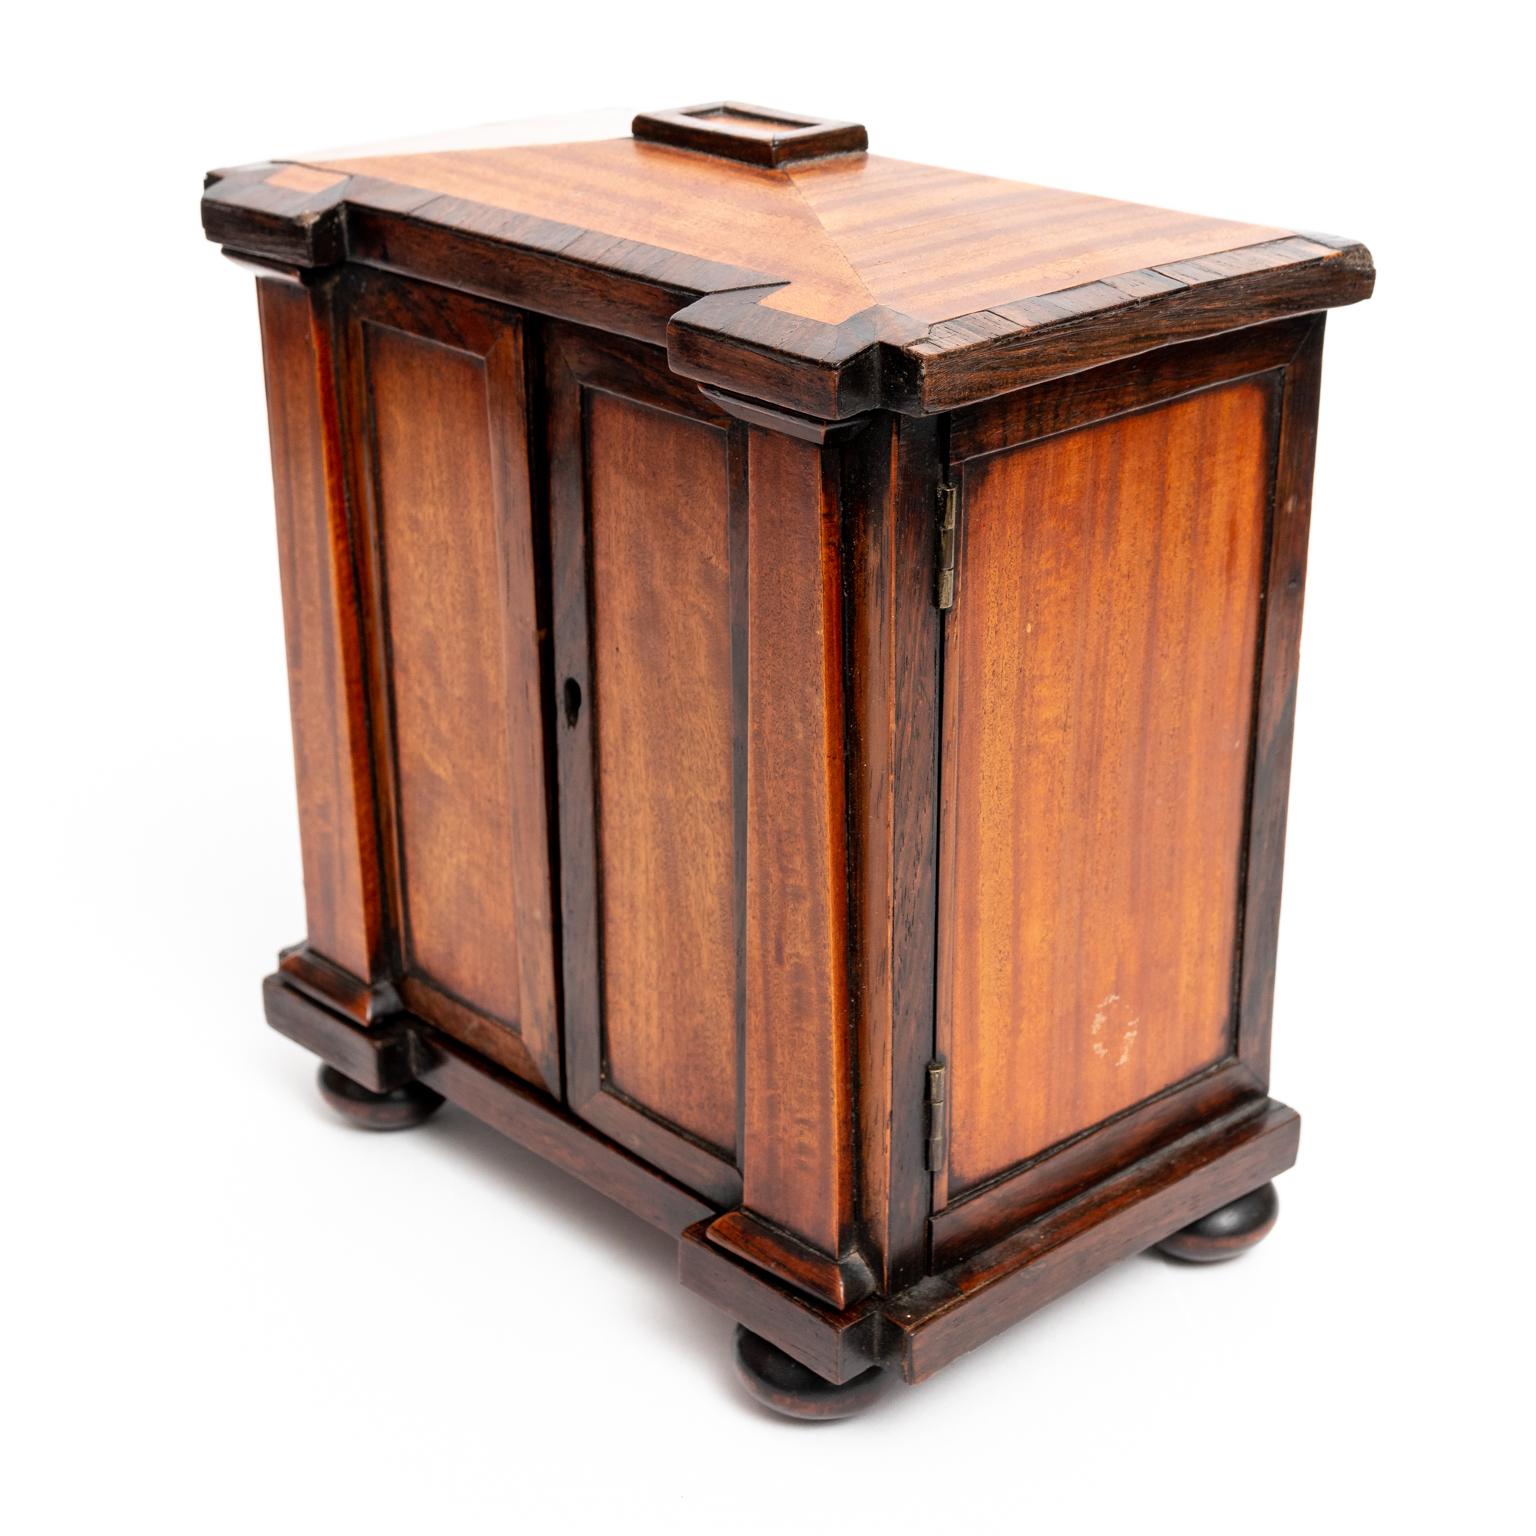 Circa 1820s Continental Biedermeier style four drawer miniature chest of drawers in Satinwood and Rosewood. The piece is constructed with two panel front doors flanked by Tuscan columns and supported by bun turned feet. Please note of wear